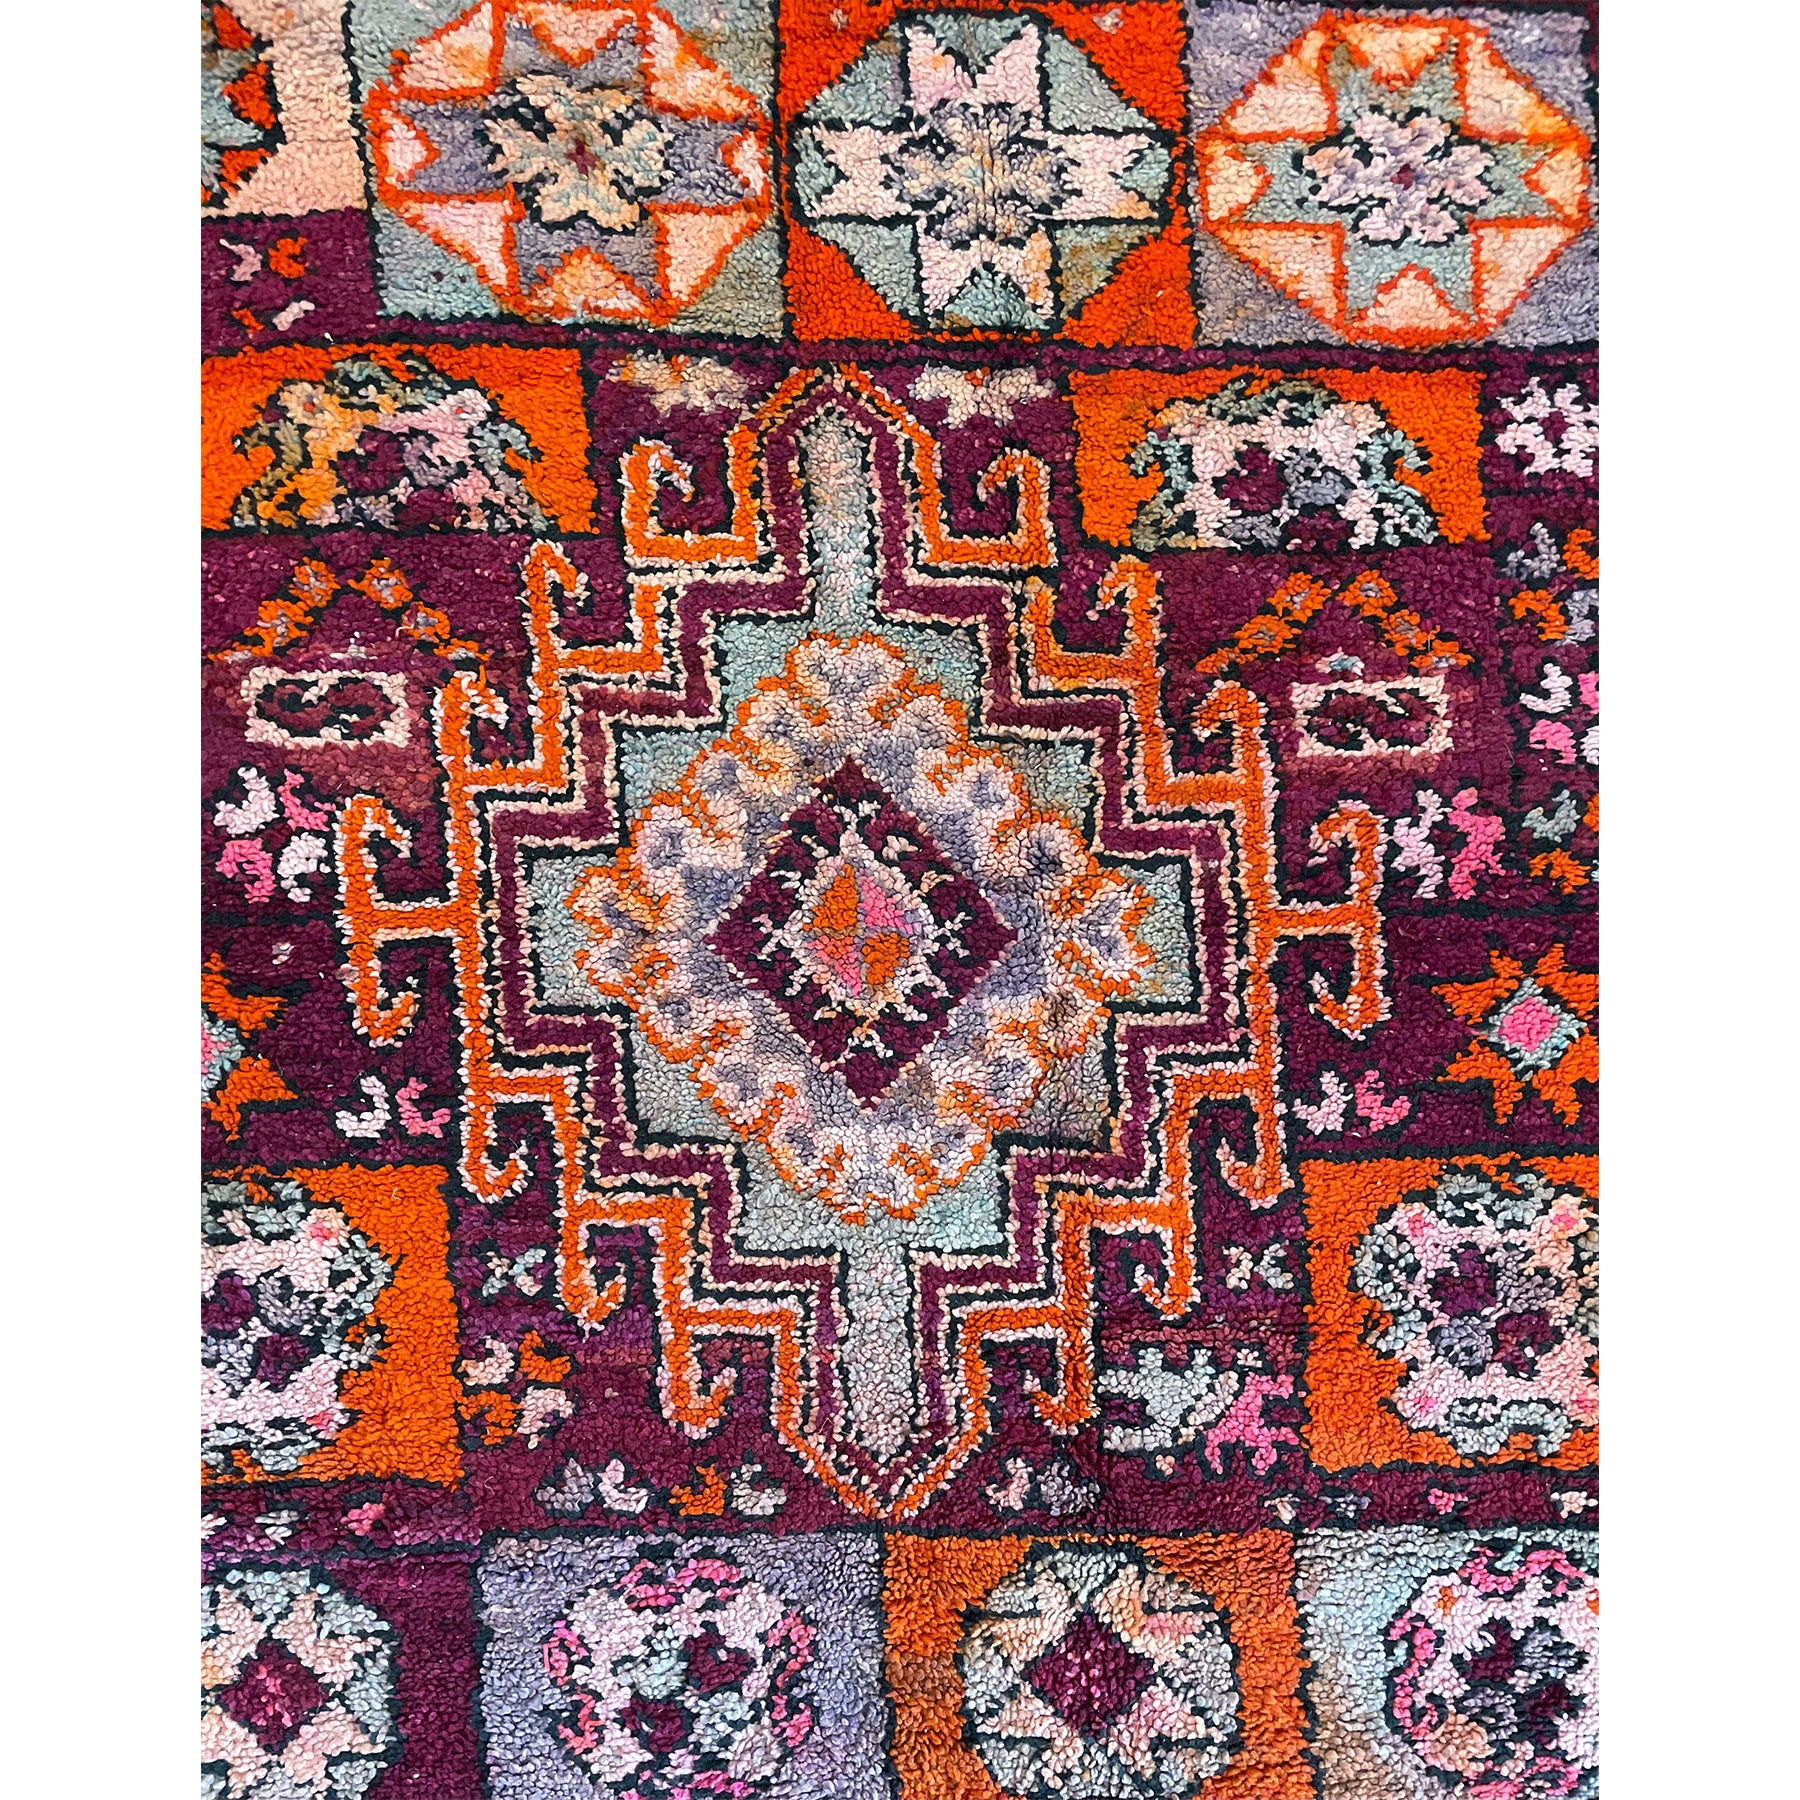 Handwoven vintage Moroccan rug with colorful details - Kantara | Moroccan Rugs